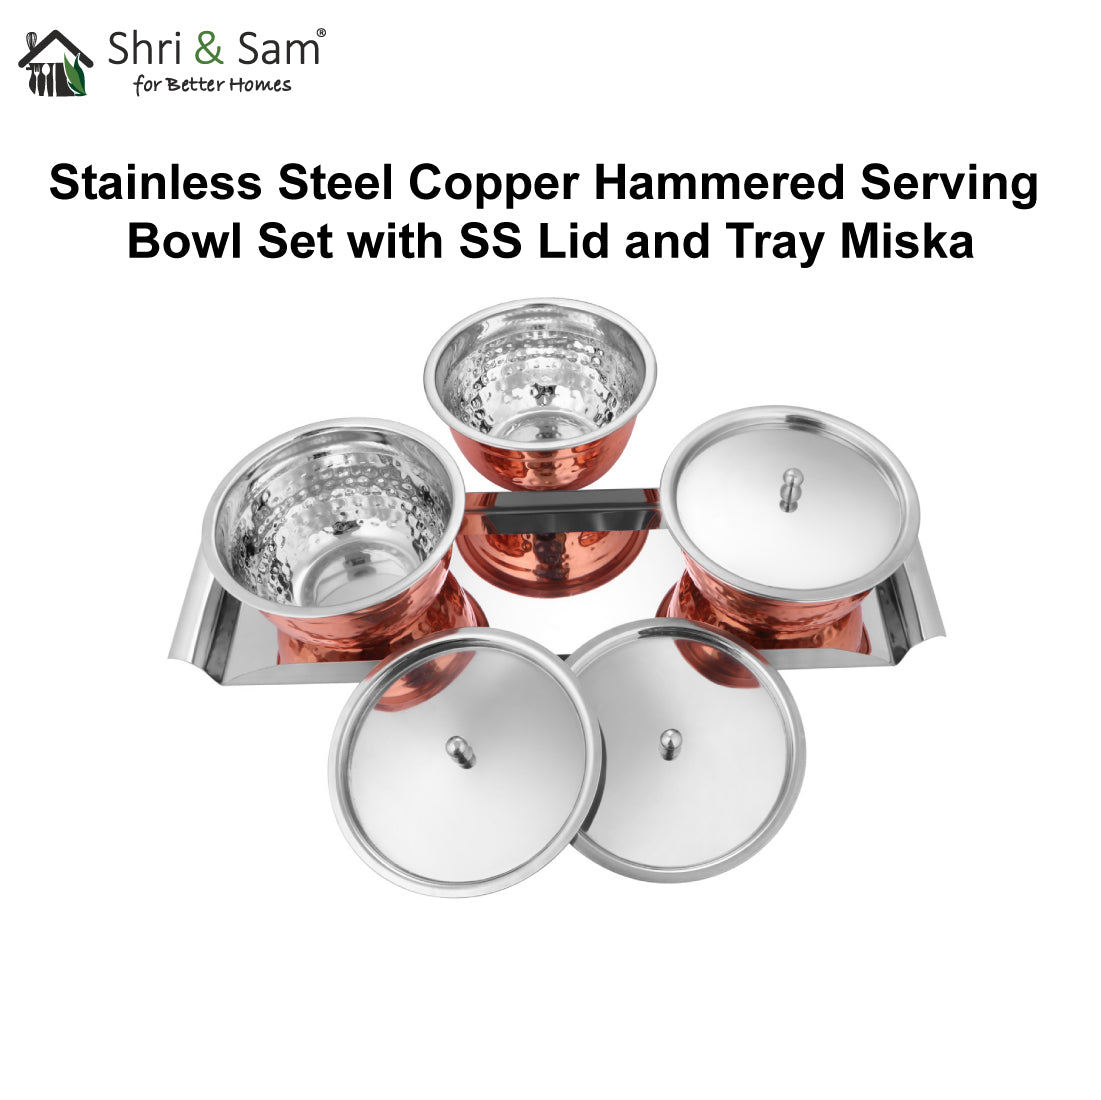 Stainless Steel Copper Hammered Serving Bowl Set with SS Lid and Tray Miska